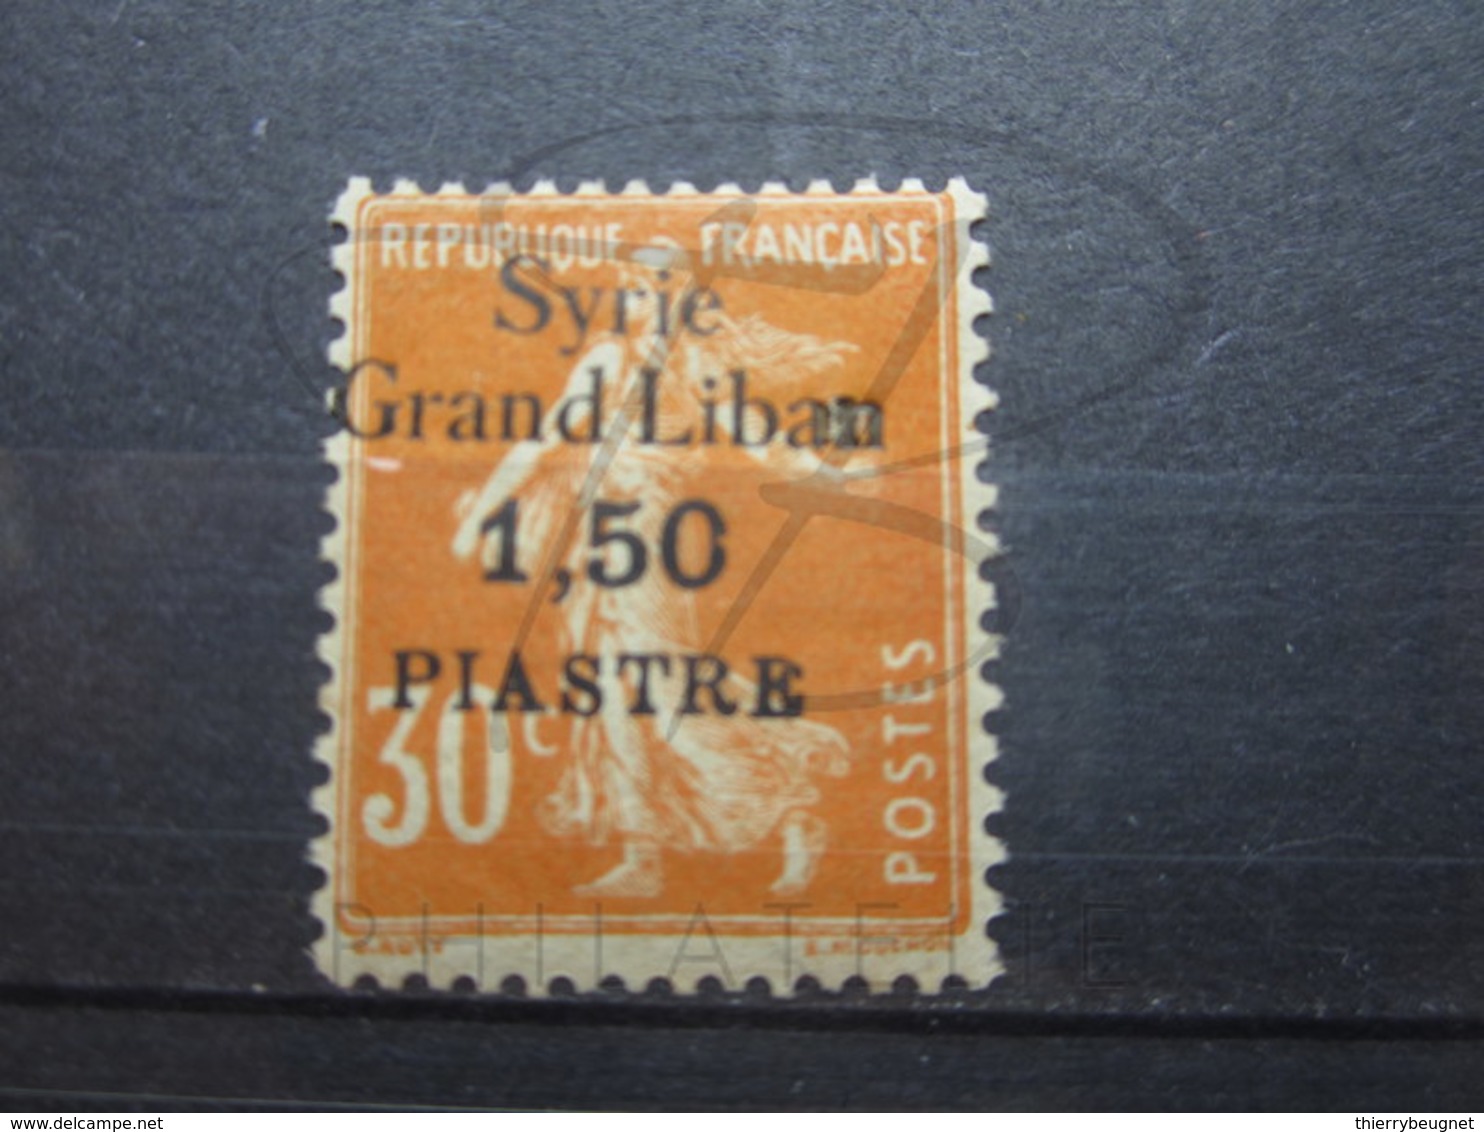 VEND BEAU TIMBRE DE SYRIE N° 94 , SURCHARGE ECRASEE A DROITE , XX !!! - Unused Stamps